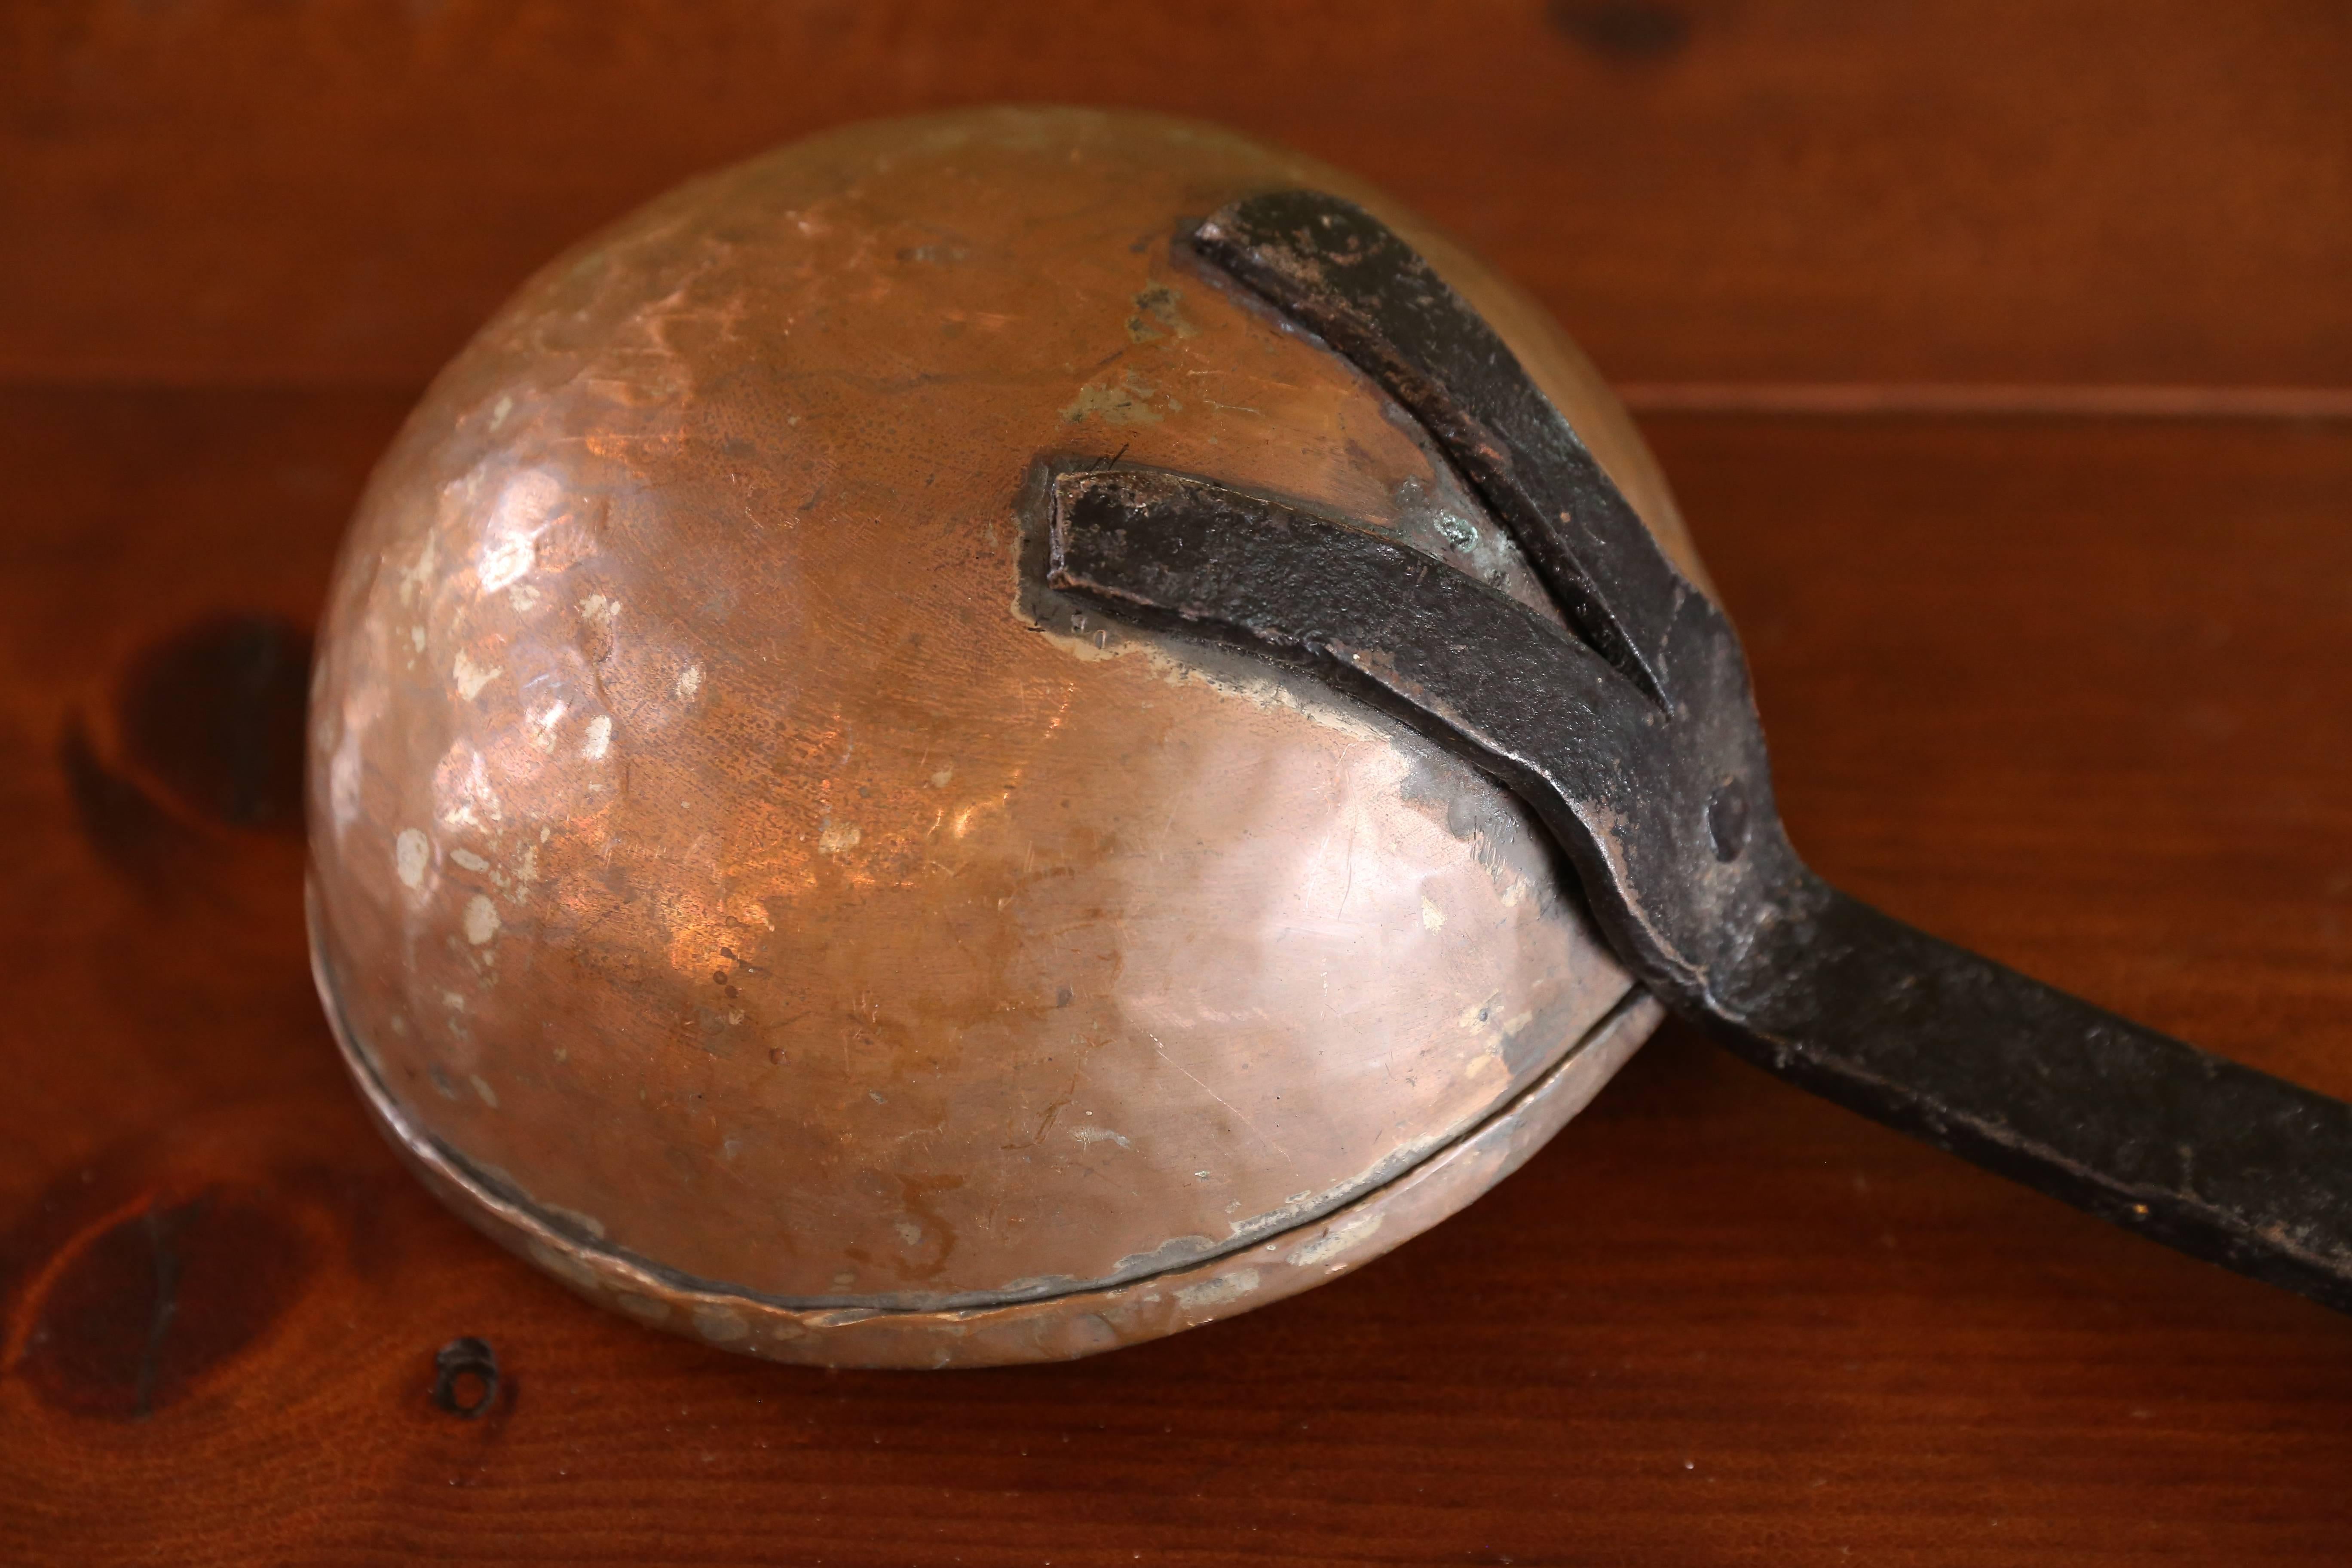 Over-sized antique copper and iron ladle: wonderful giant French hammered copper ladle with fine forged iron hooked handle. All hand-forged and original circa 1920s. Gorgeous decorative accent that is much larger than it appears in photographs (see